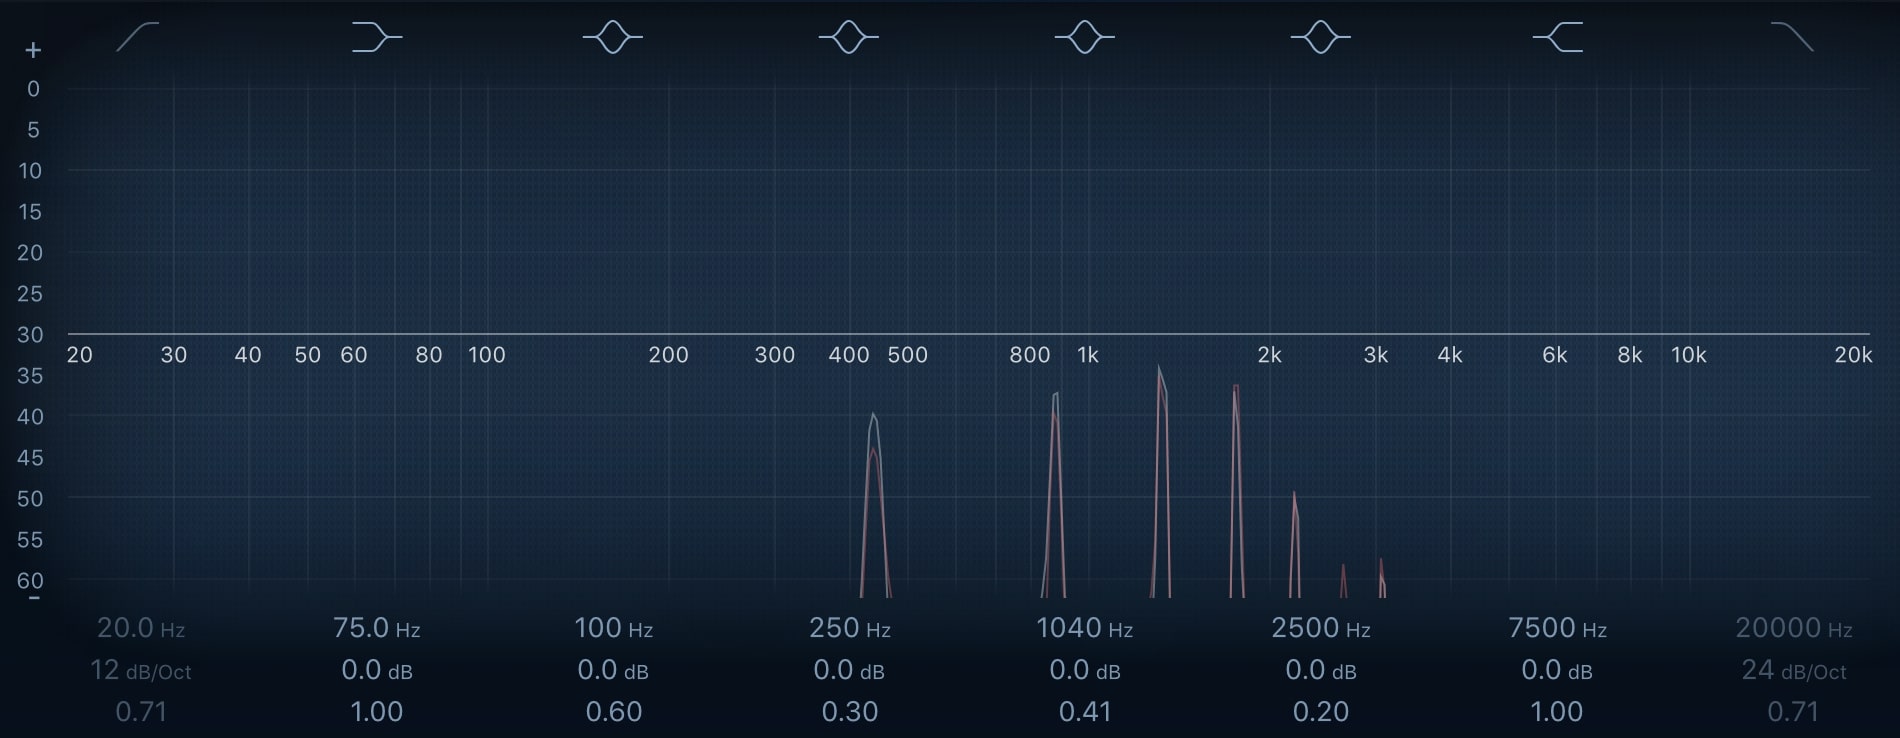 frequency range of the fundamental pitch, 440 Hz on oboe